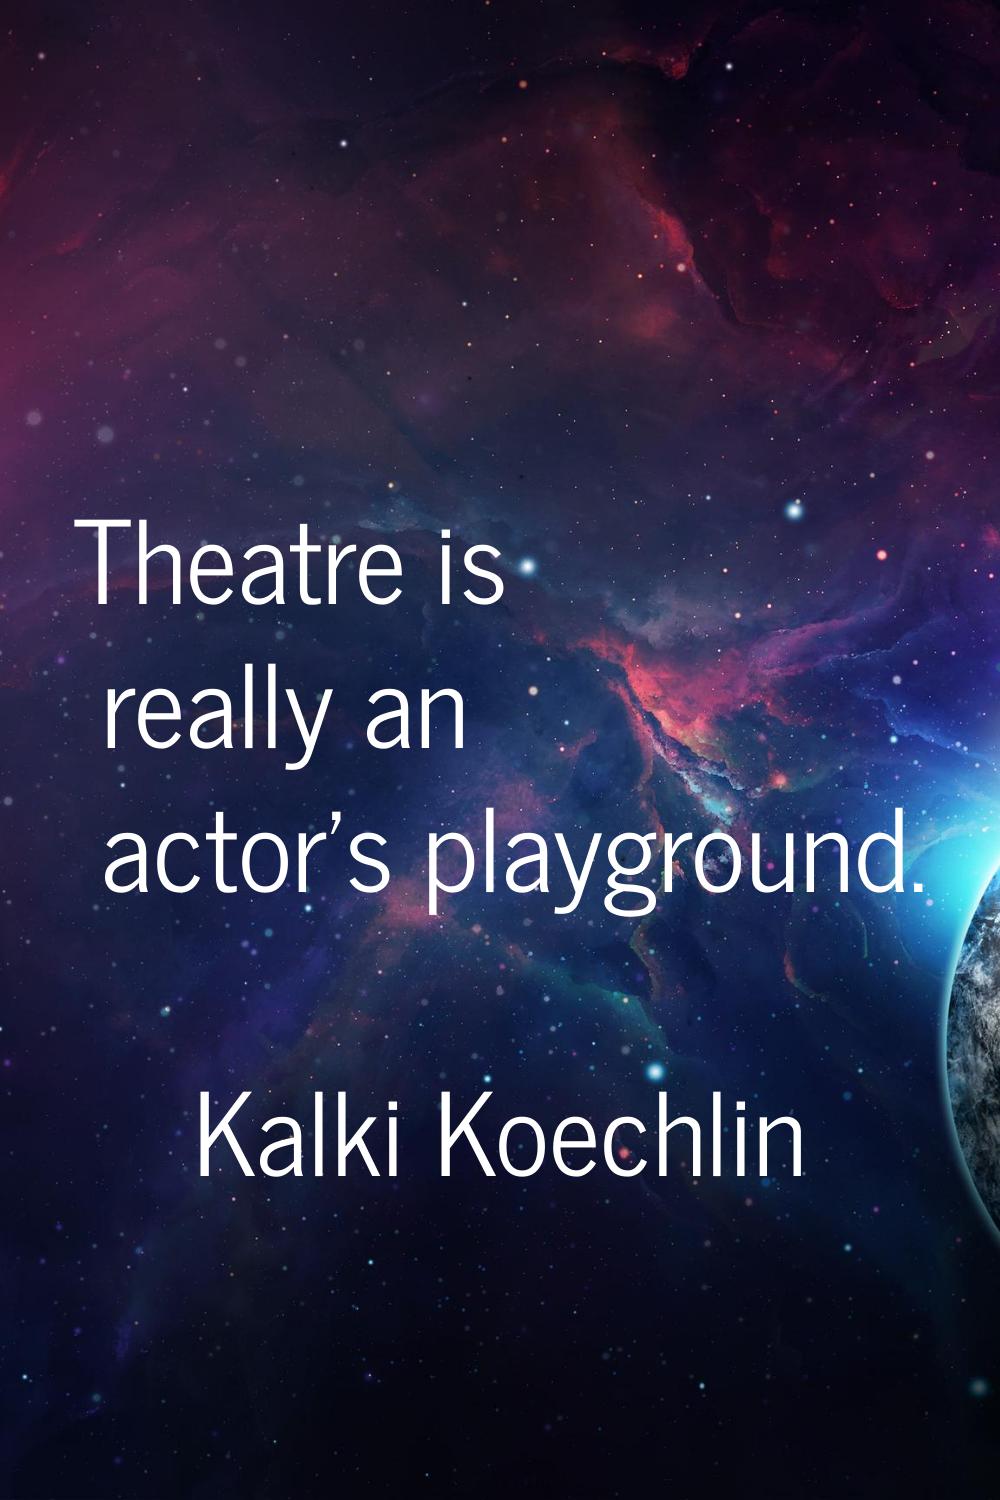 Theatre is really an actor's playground.